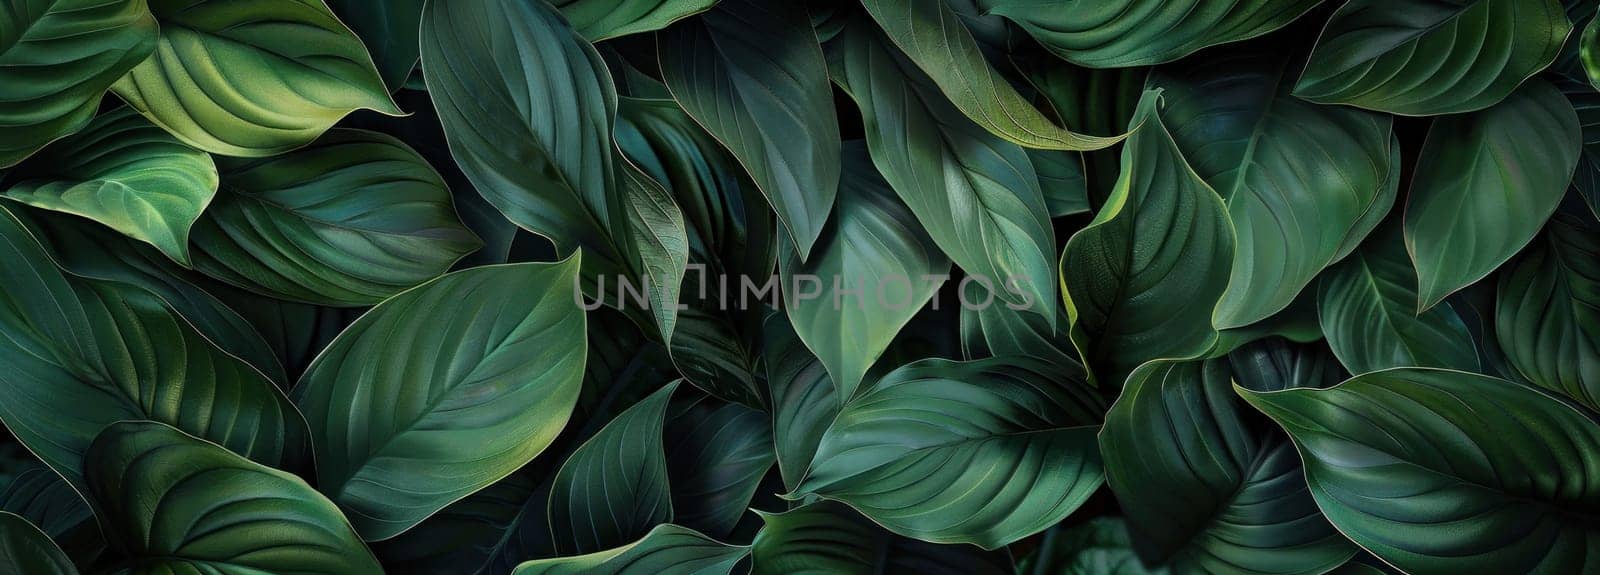 Green leaves on dark background with black border nature's elegance and beauty captured in artistic painting